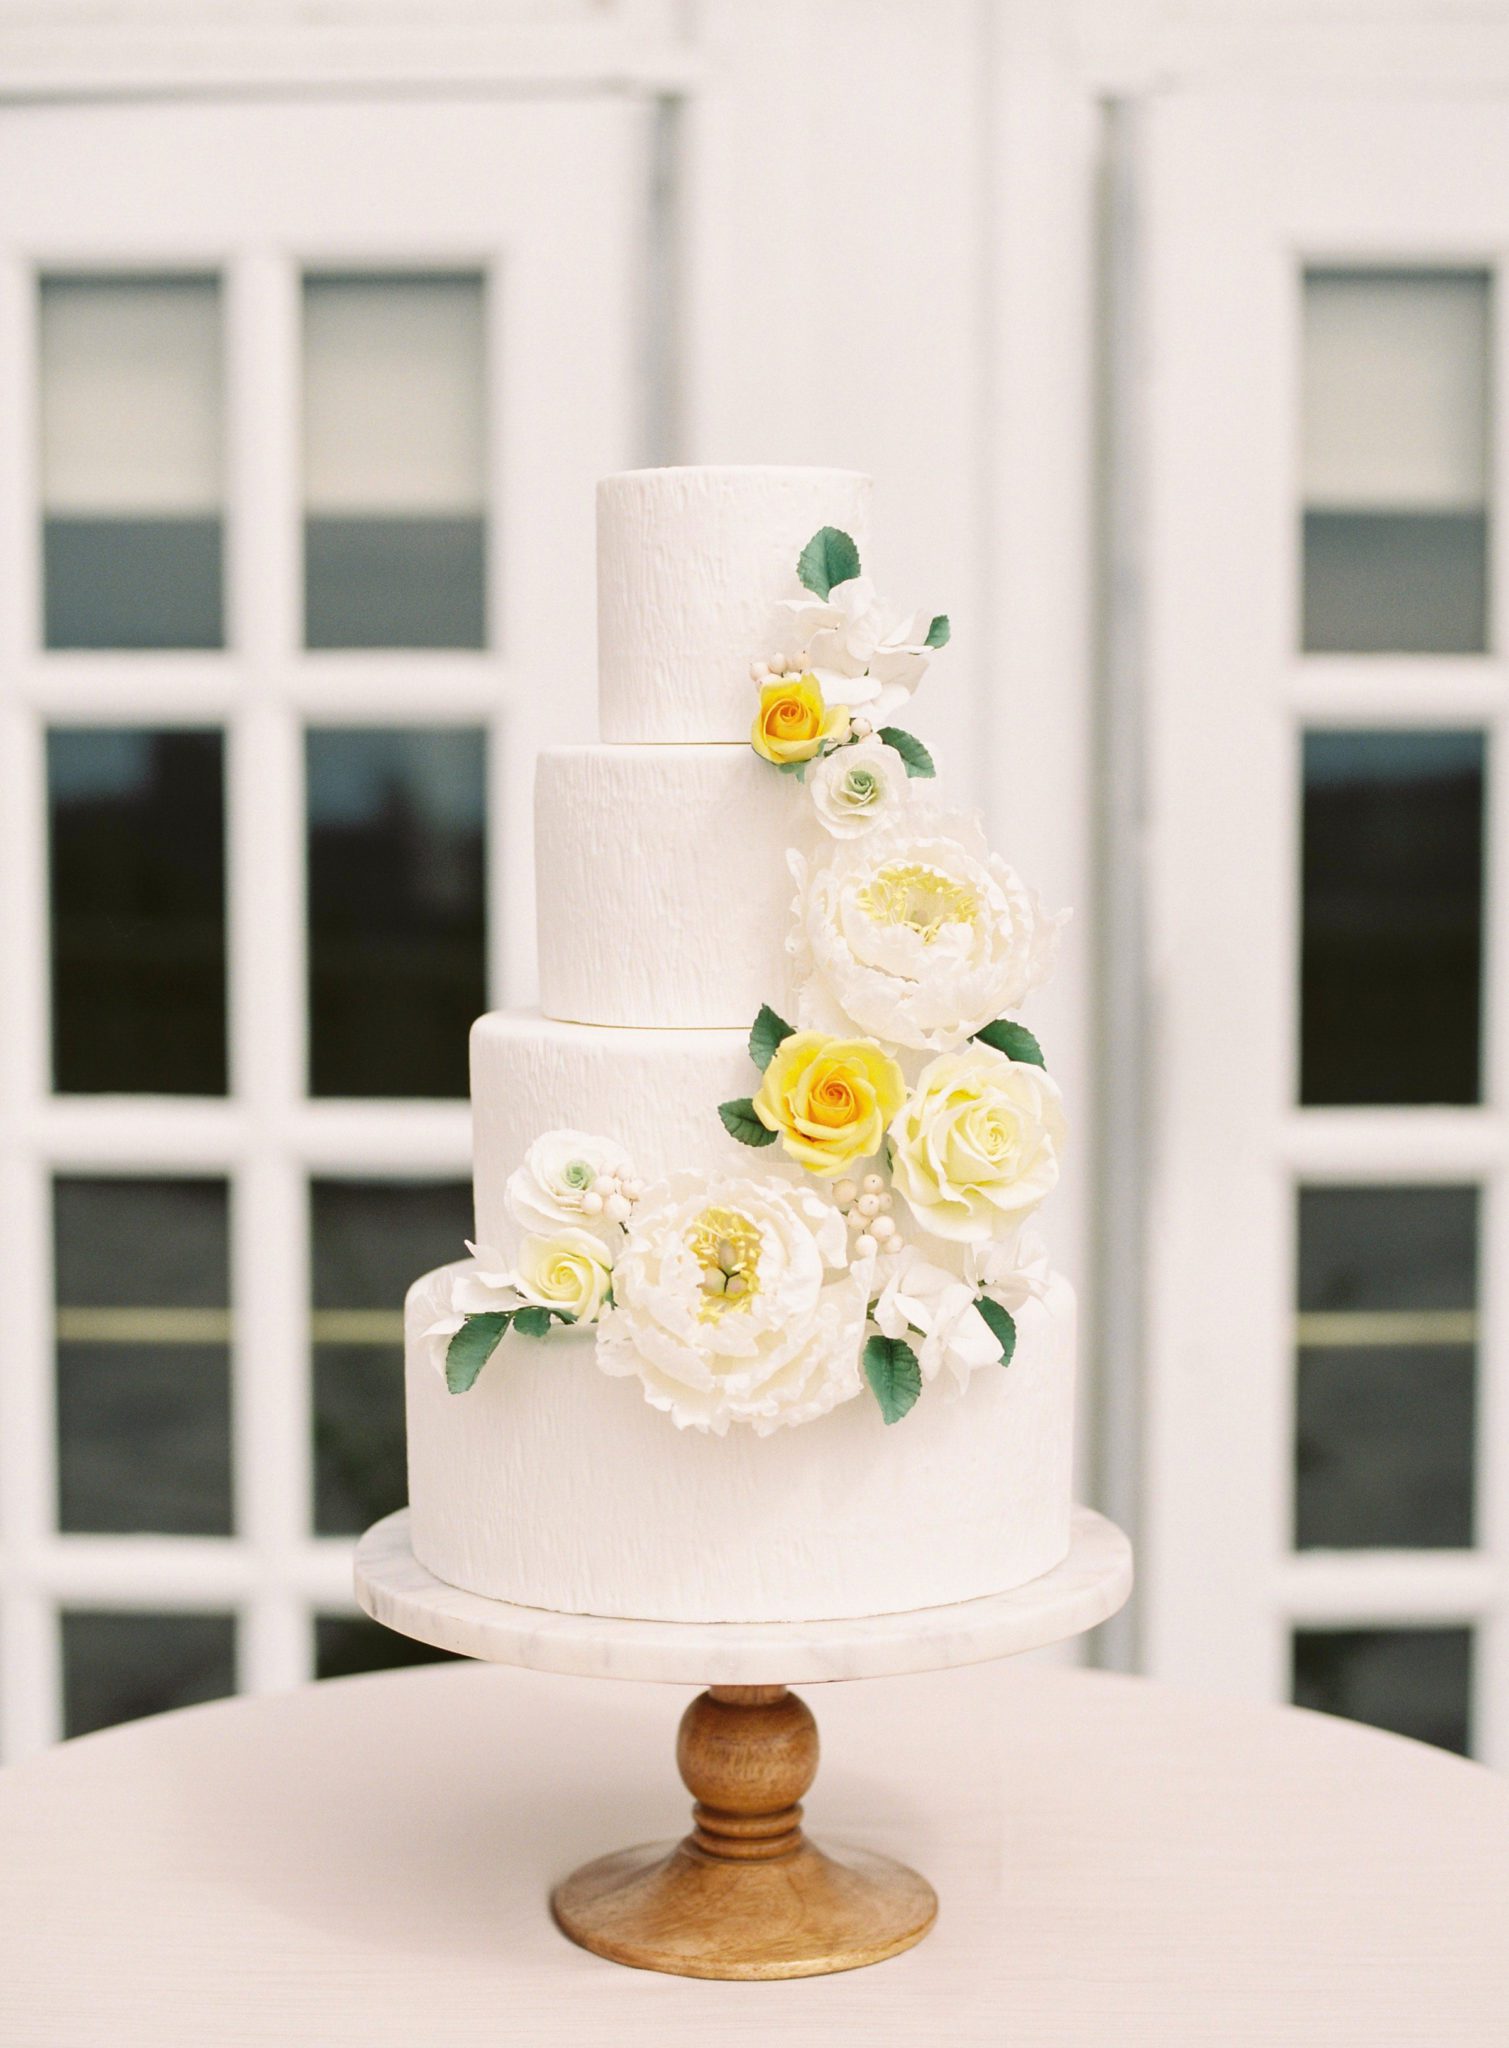 Three tiered yellow and white cake with floral inspiration for your wedding cake